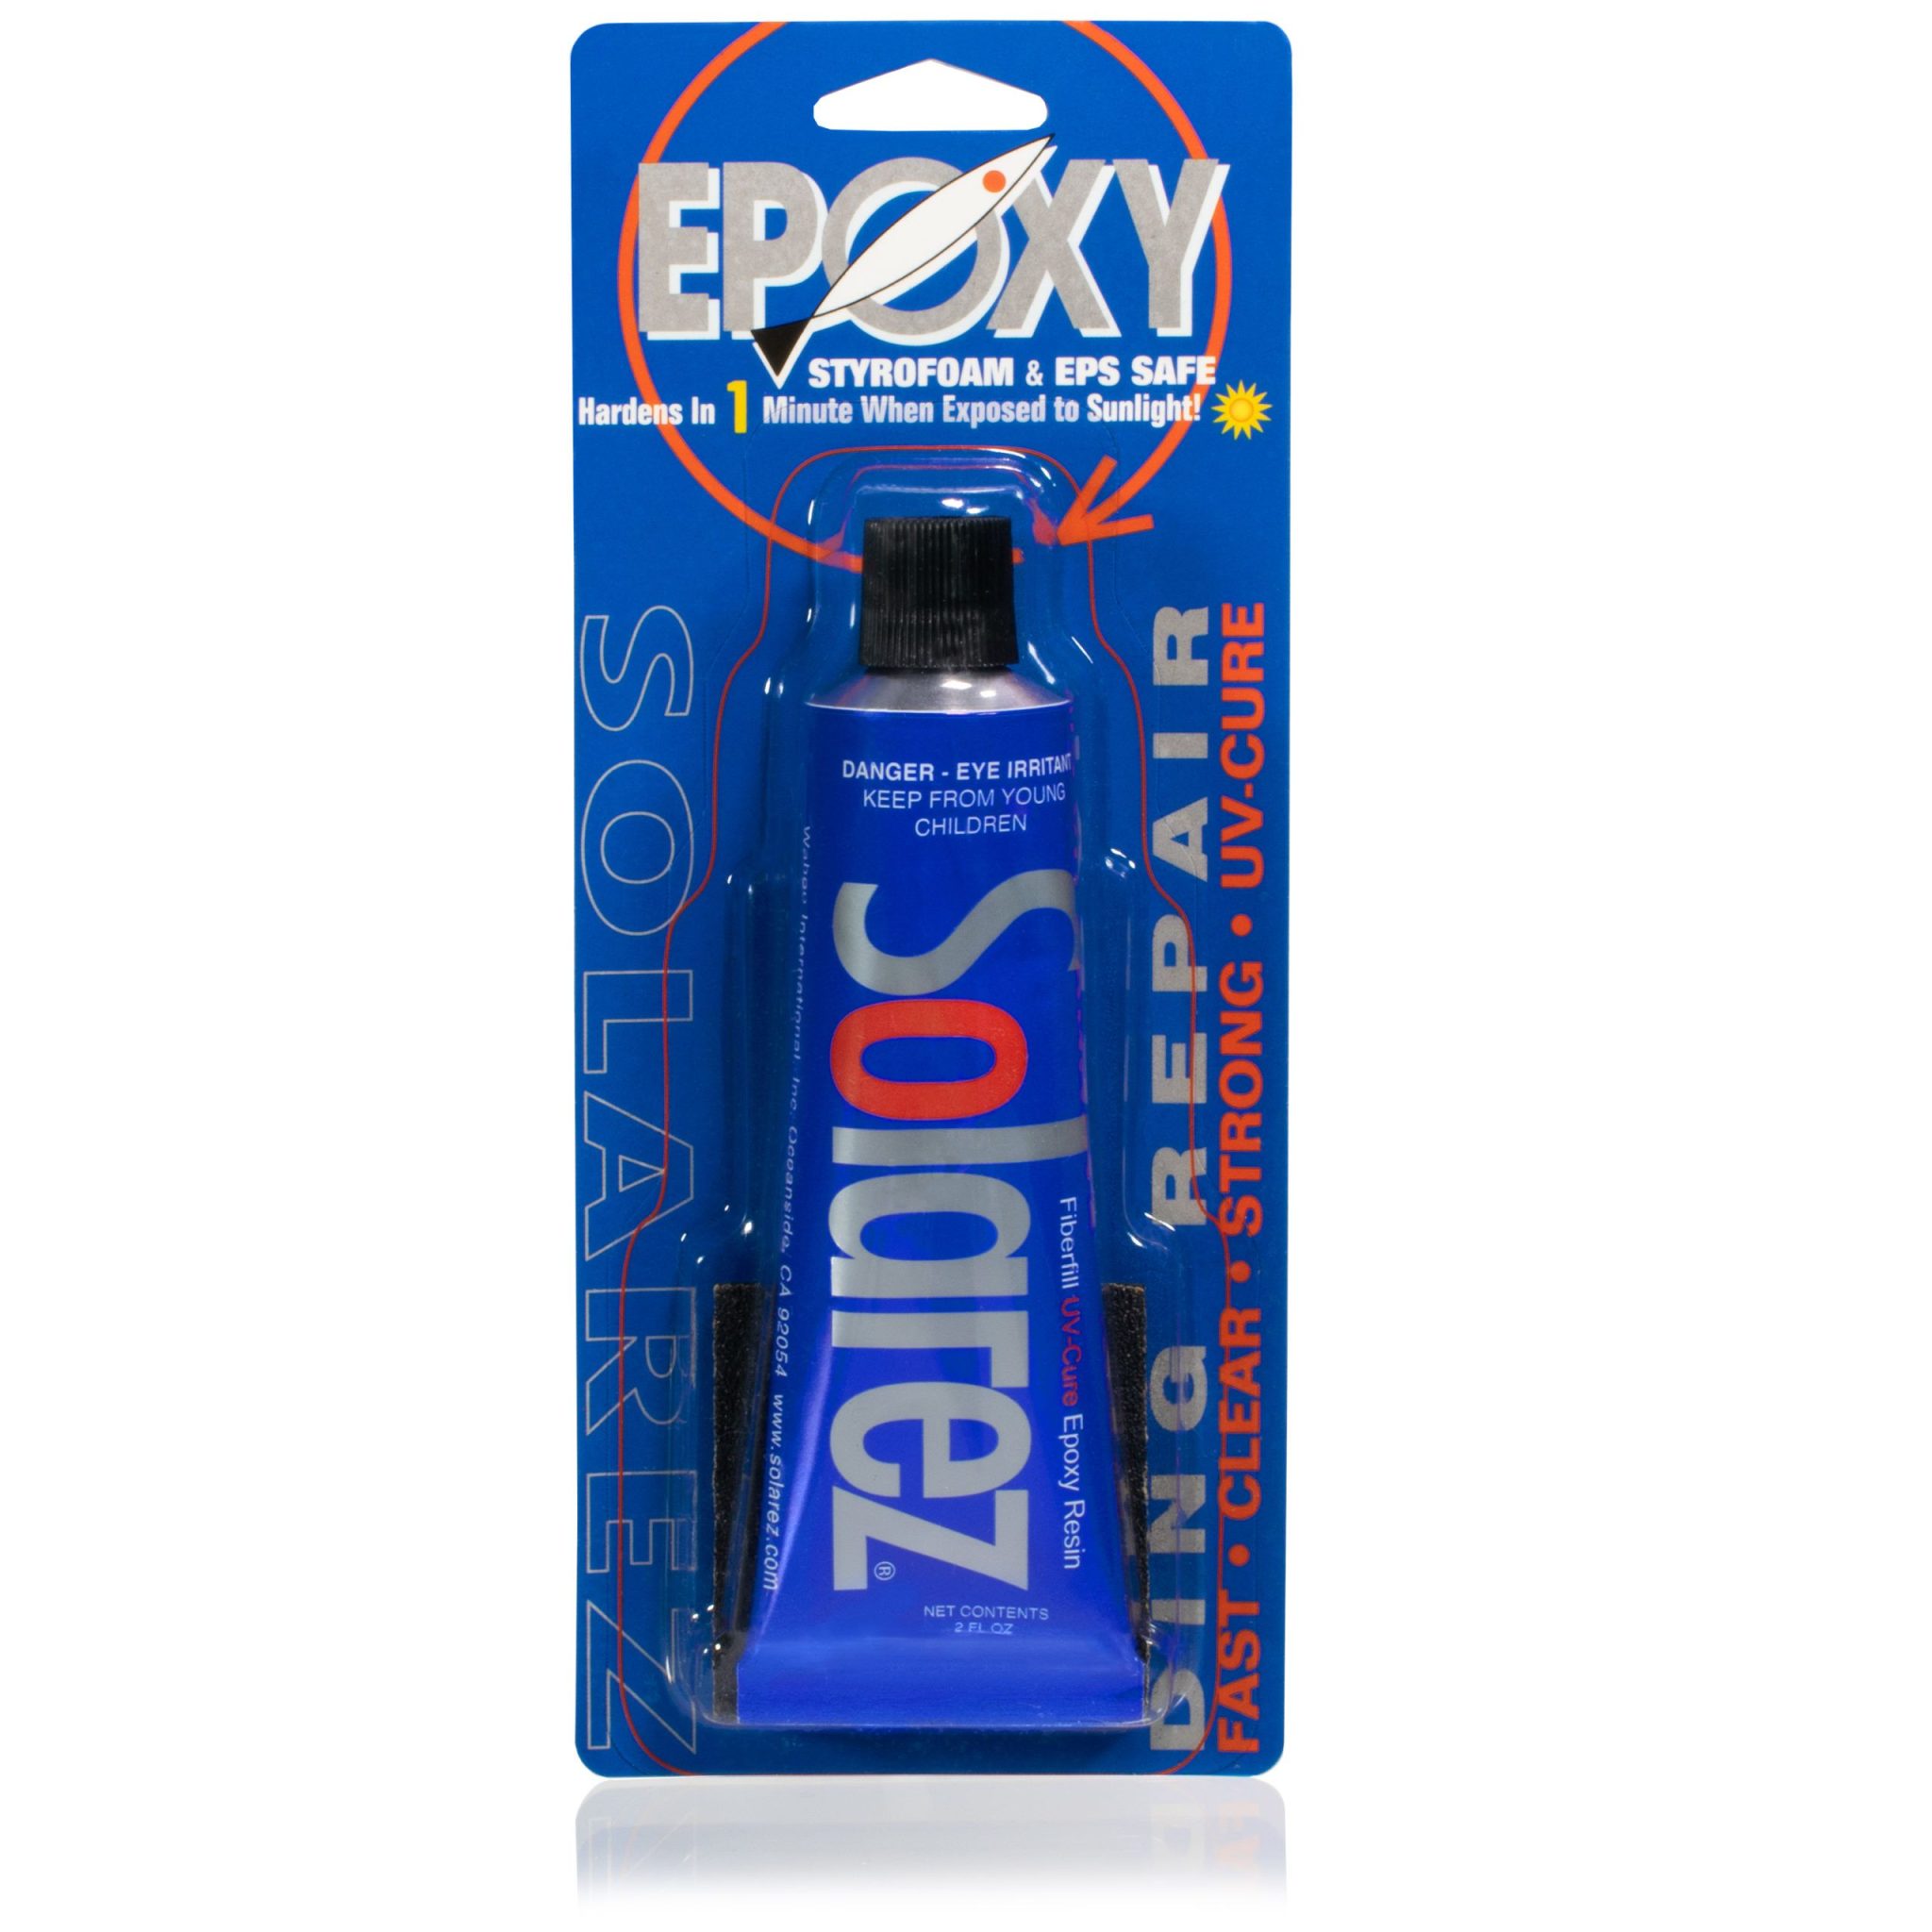 Picture shows Solarrez epoxy ding repair 2oz tube in packaging Front View